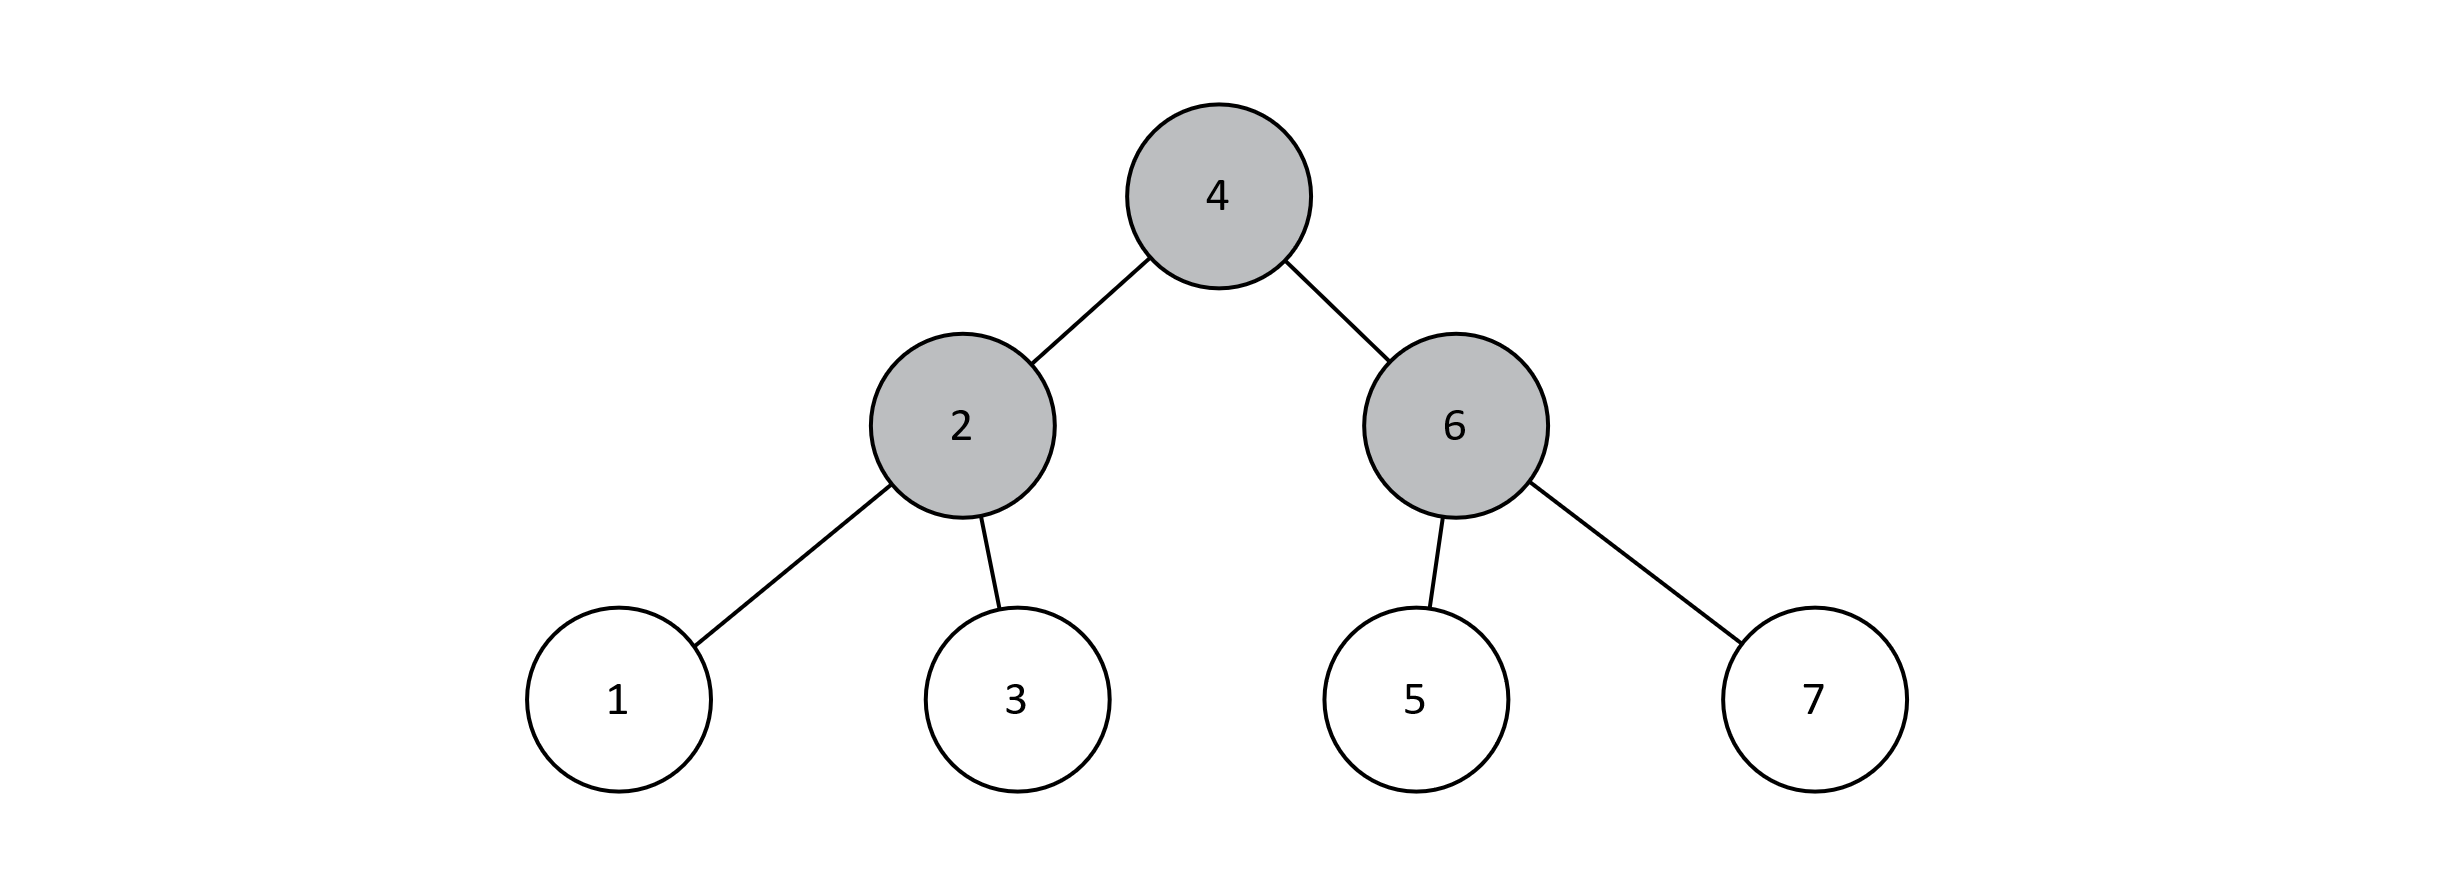 A complete binary search tree with 7 nodes.